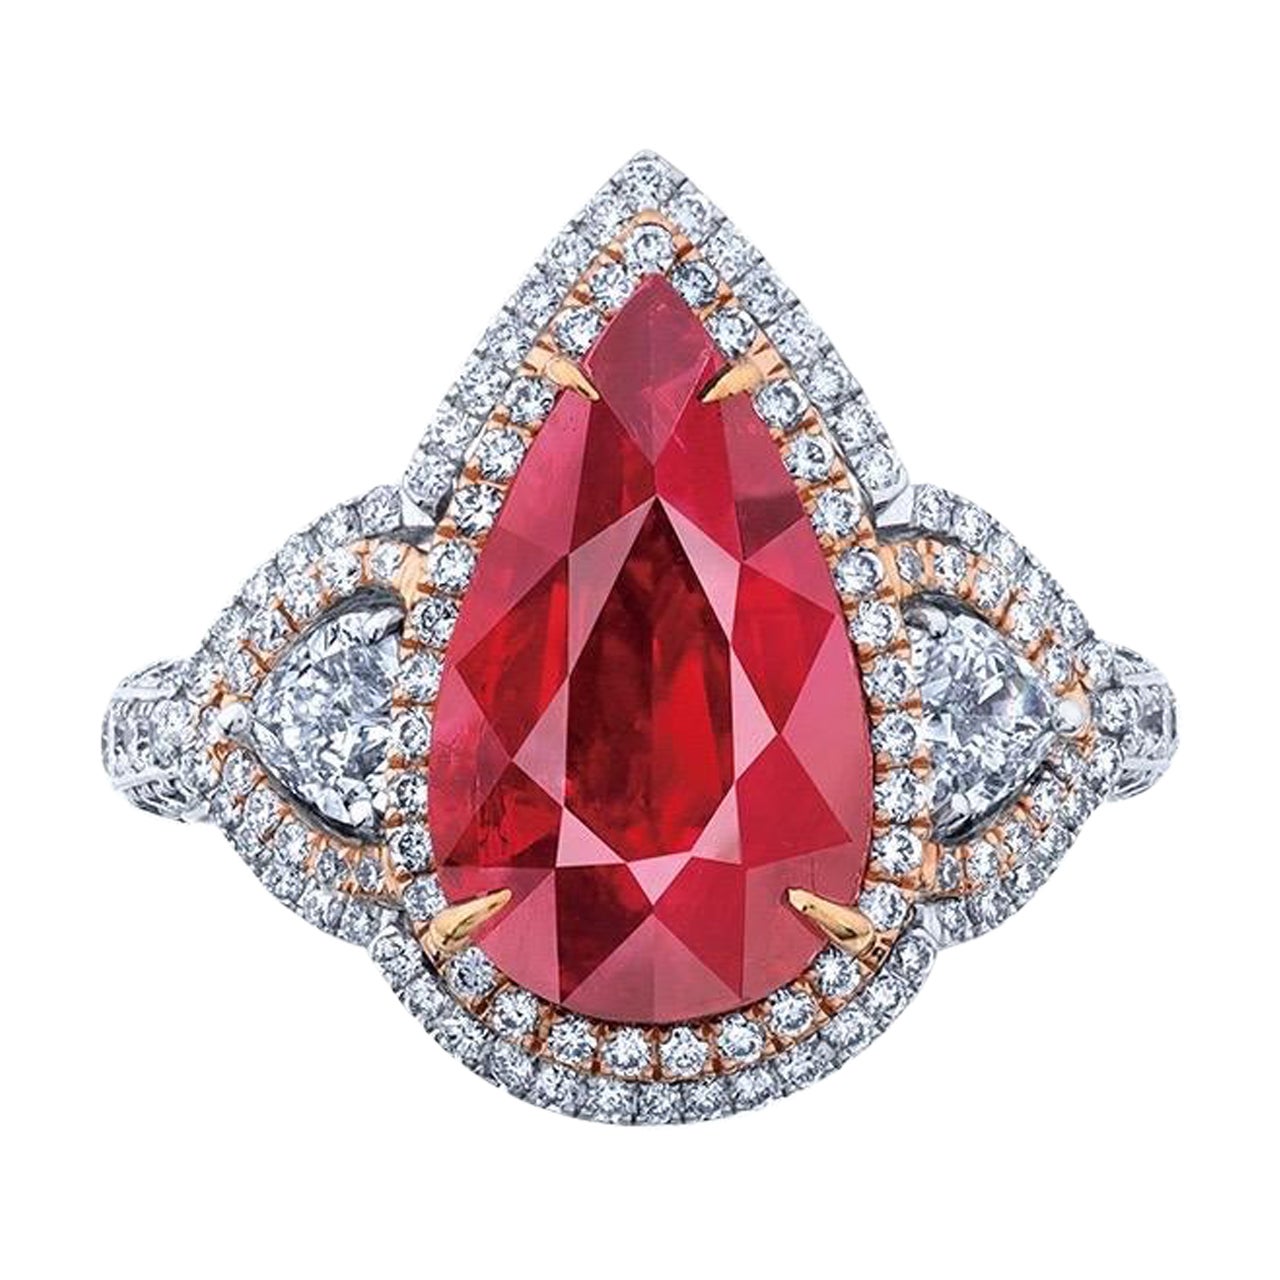 Emilio Jewelry Certified Untreated 4.40 Carat Ruby Ring 